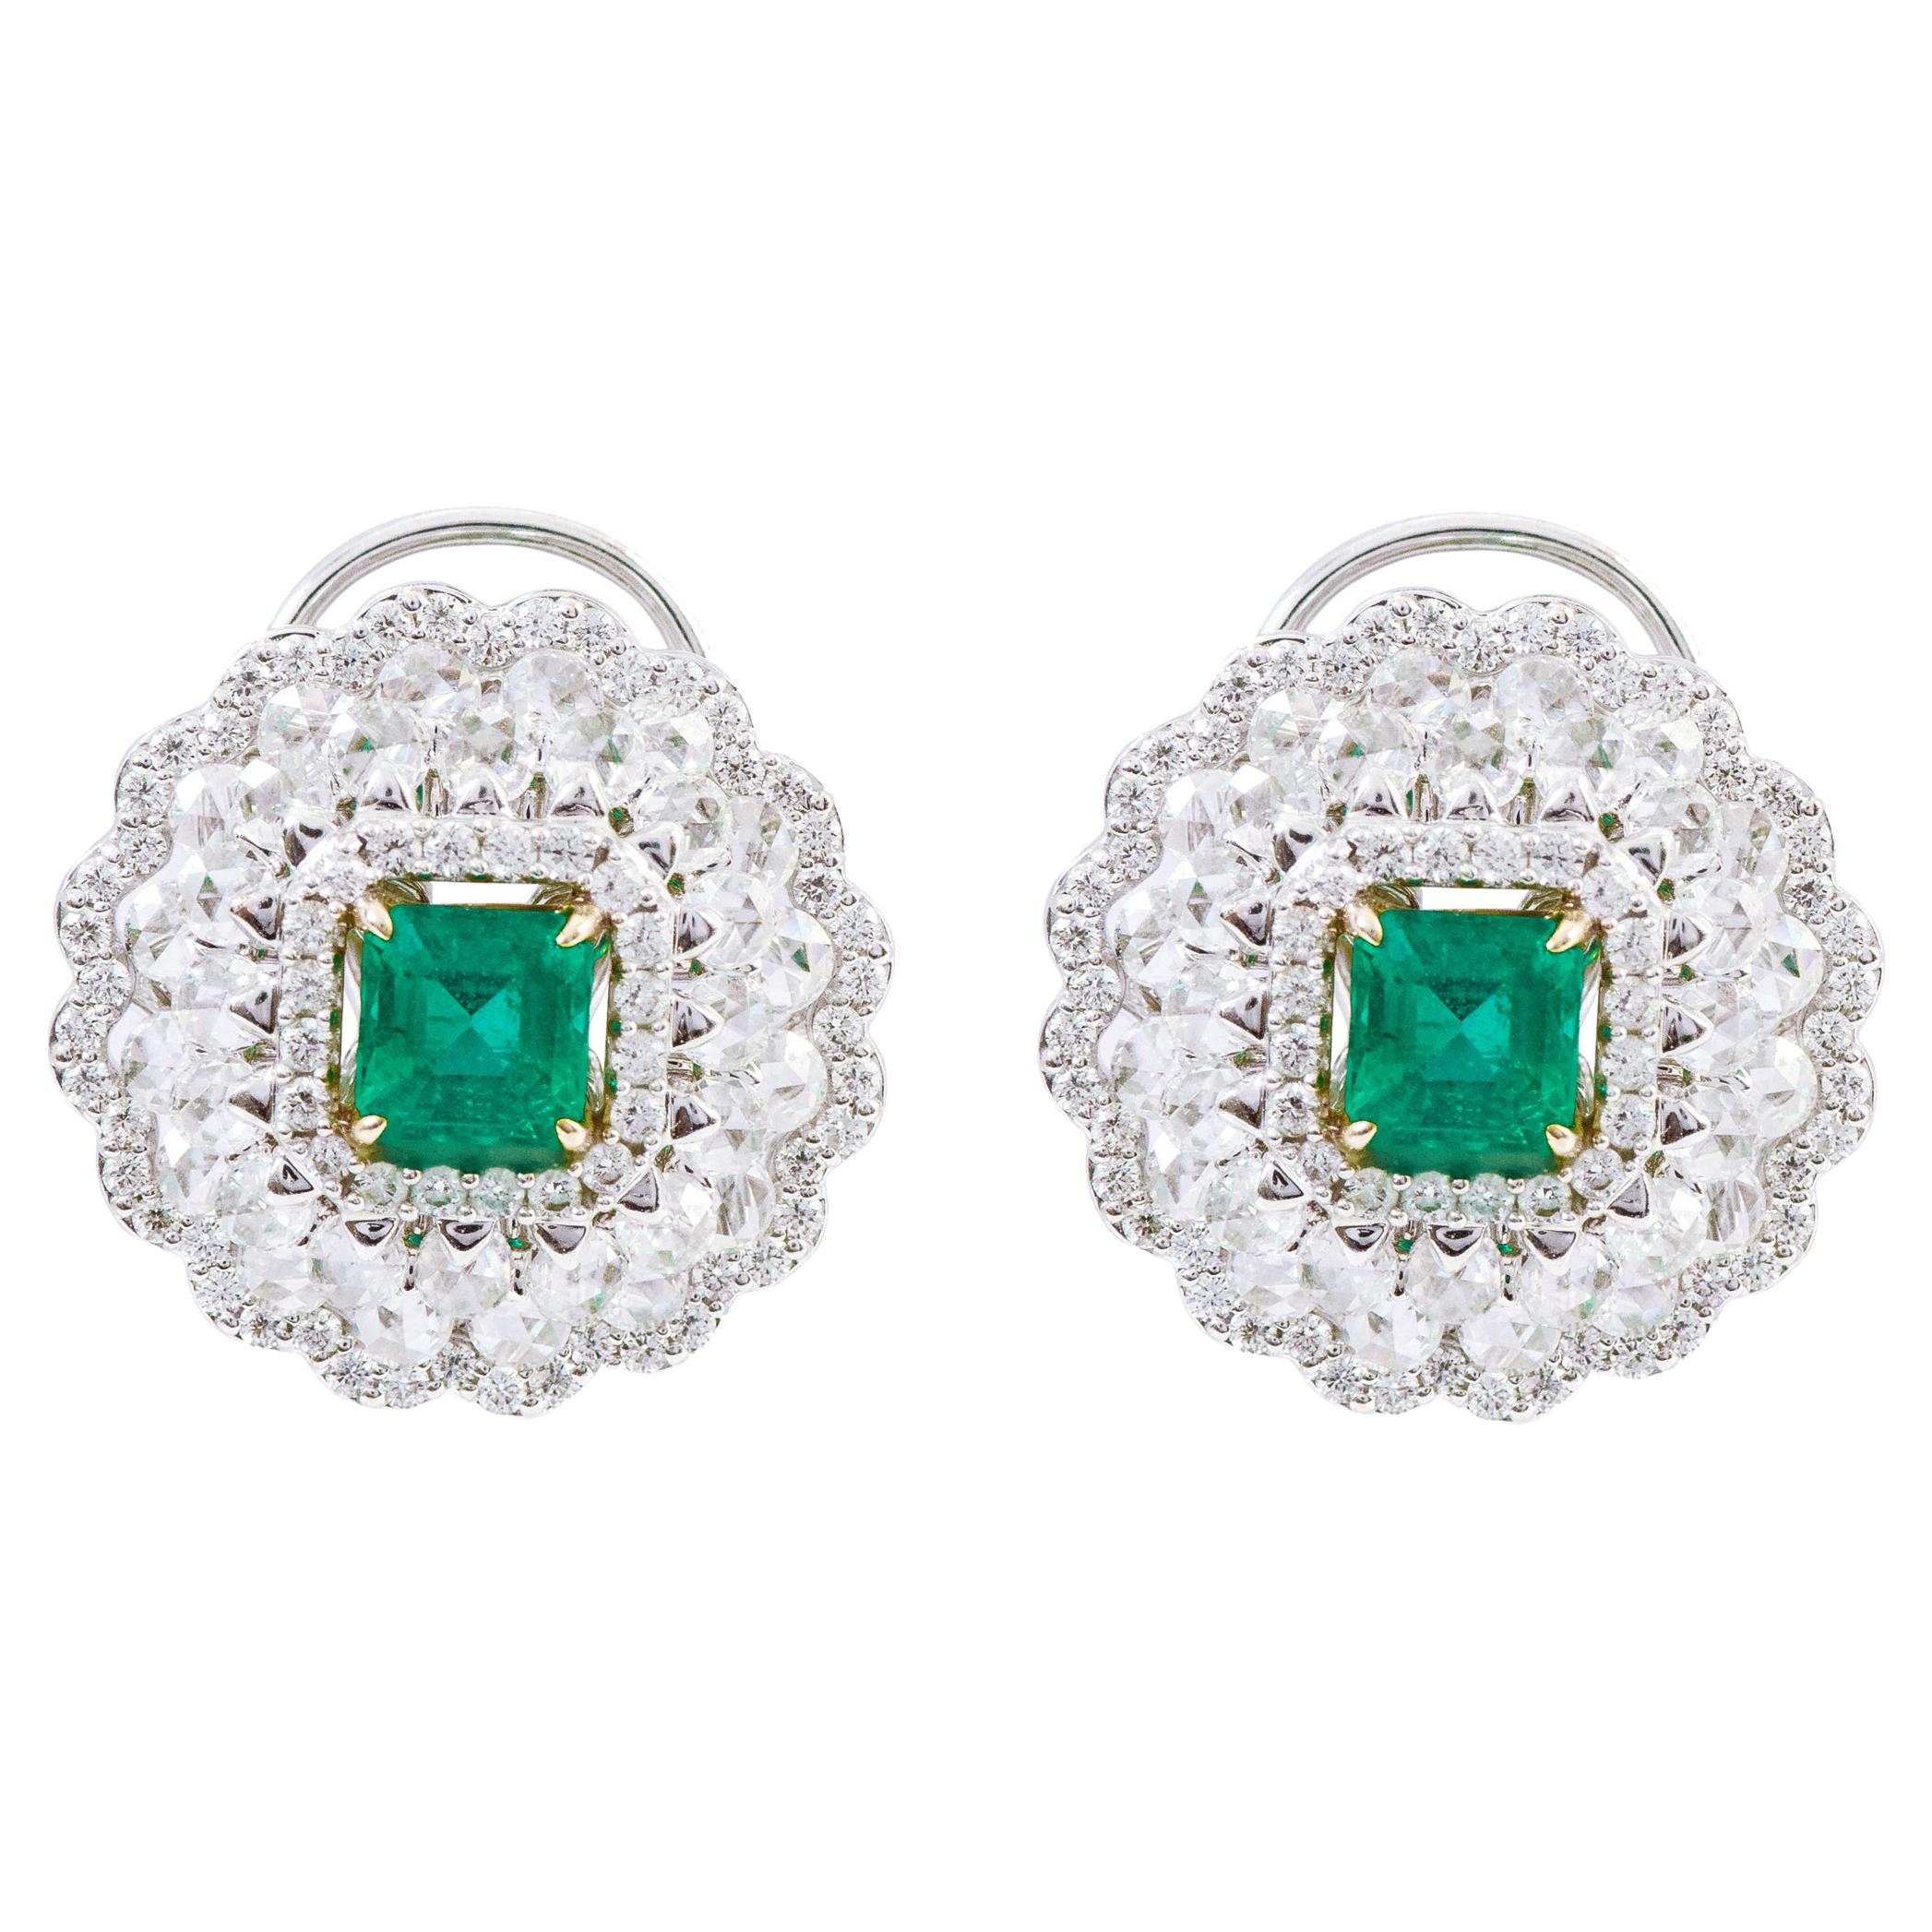 18 Karat White Gold 3.37 Carat Natural Emerald and Diamond Stud Earrings For Sale